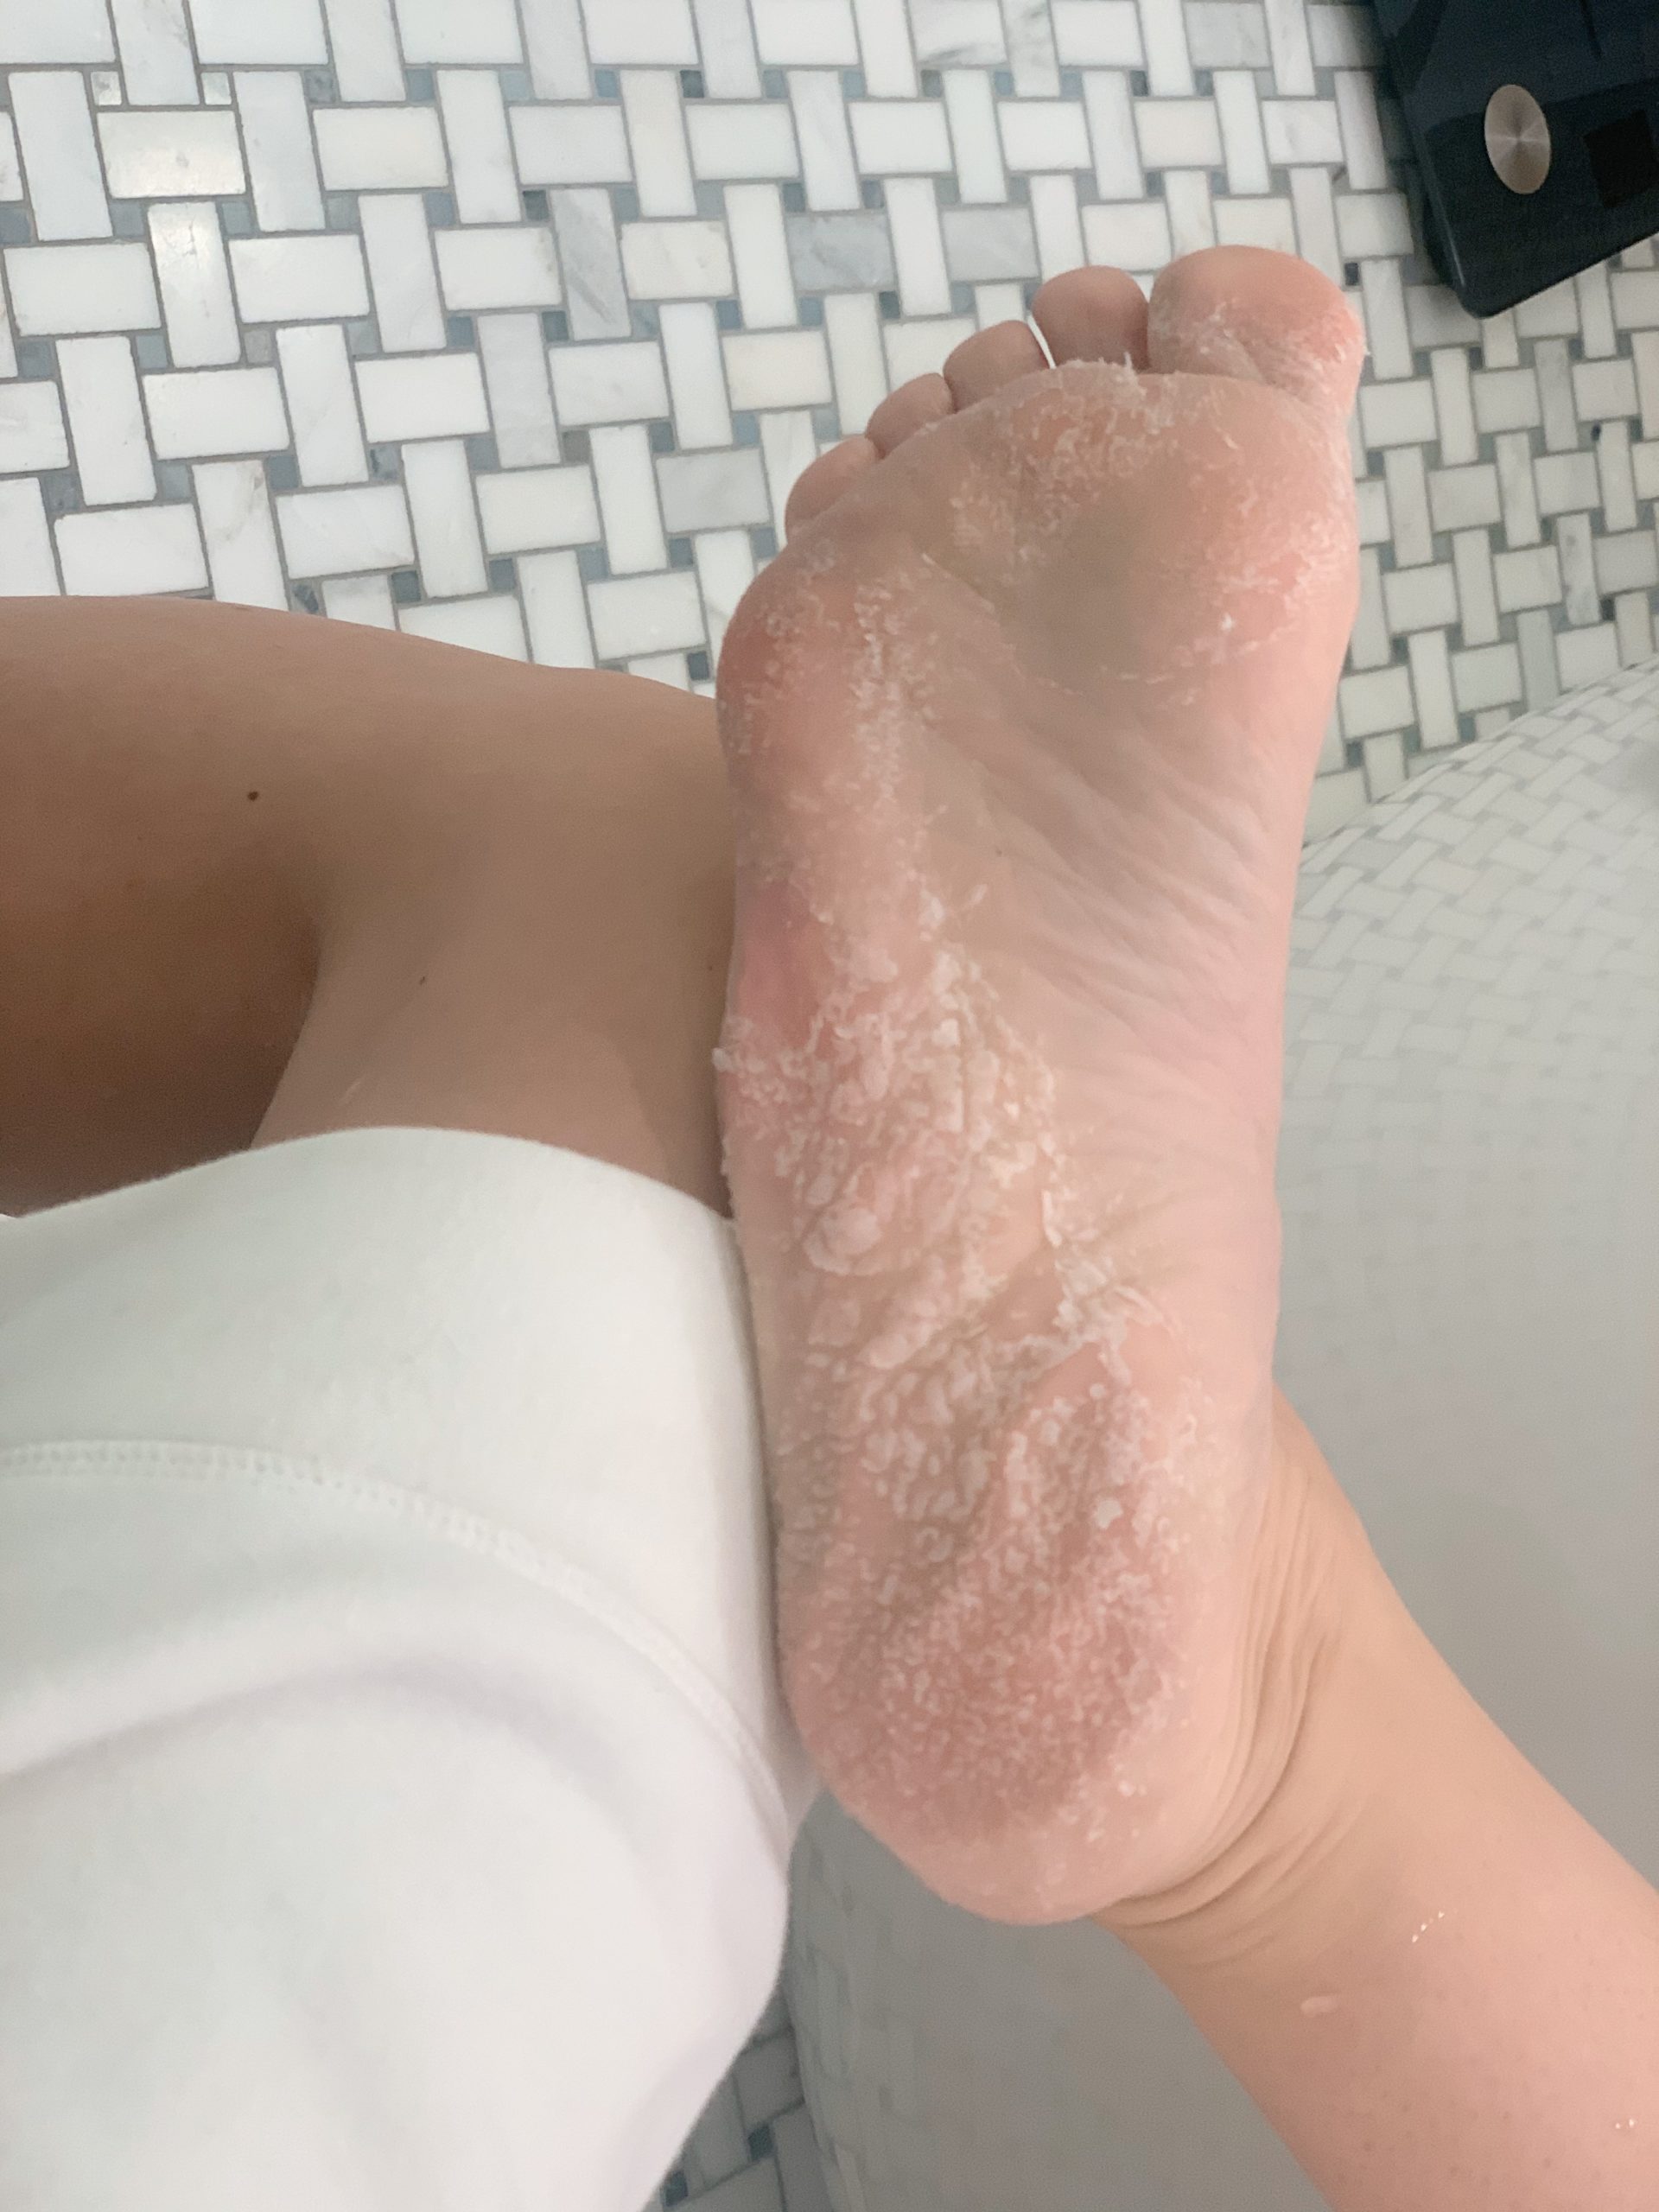 Baby Foot Peel Review: Results, Photos, and Before and After - The Skincare  Edit